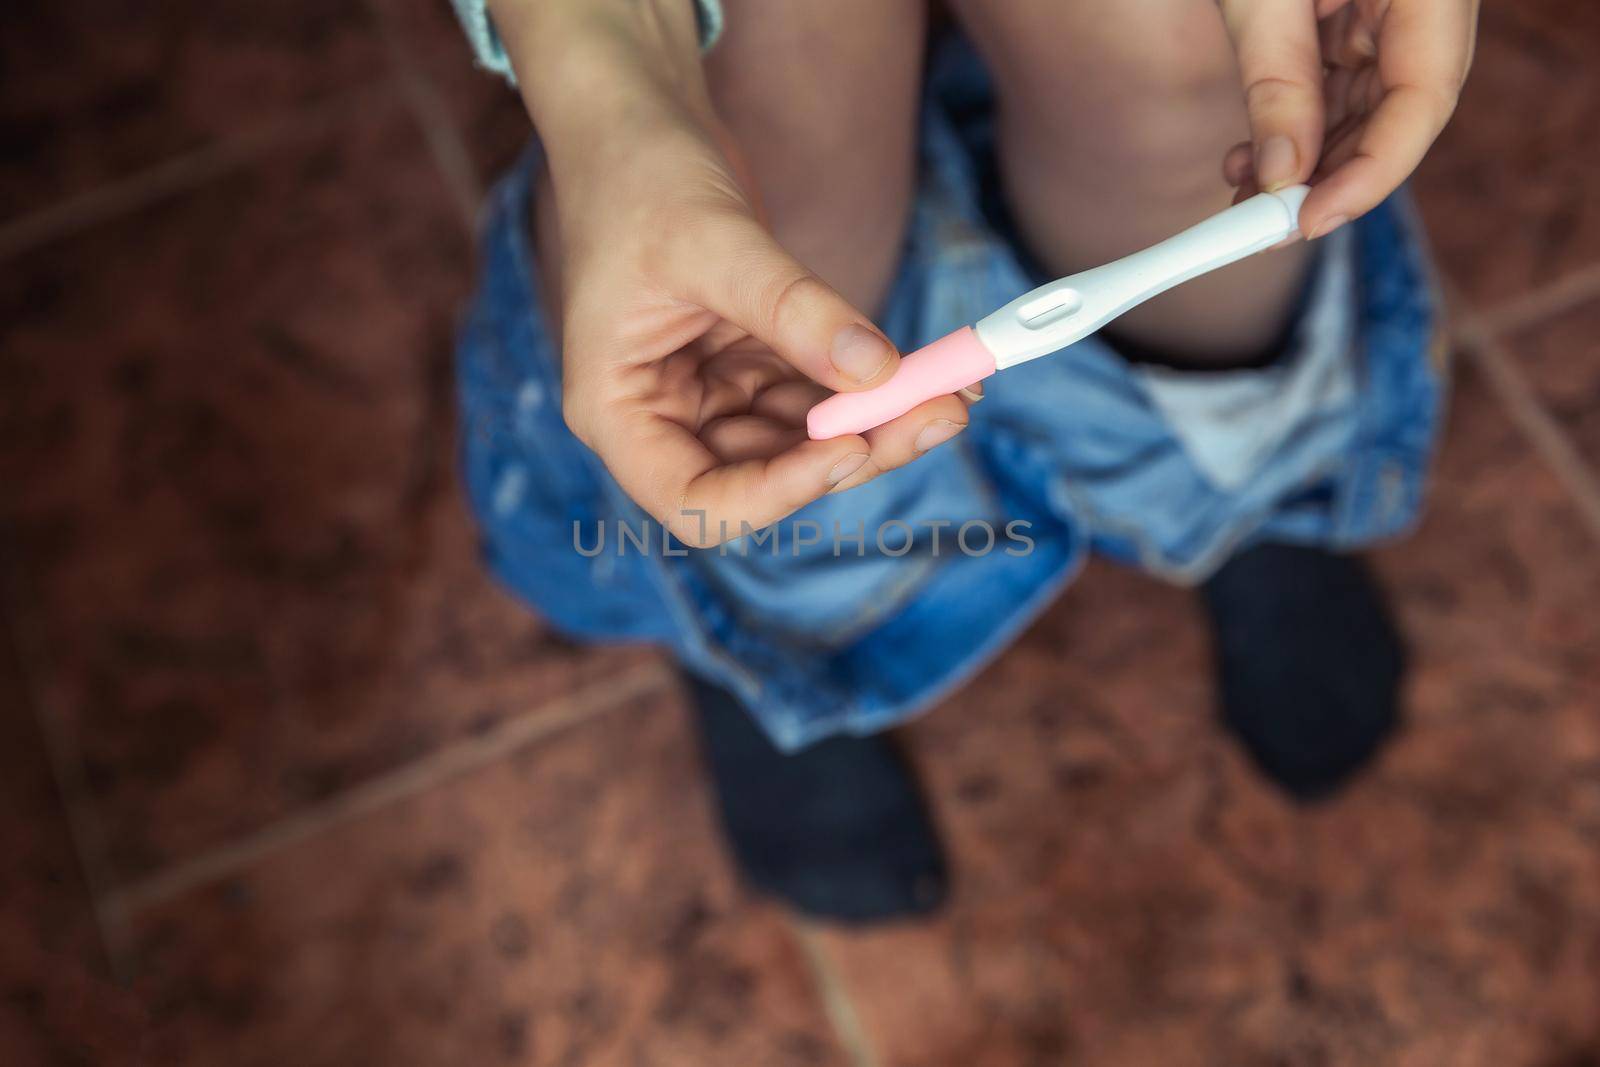 Young woman checking results of a pregnancy test in bathroom close-up, new life,family,mother,baby concept by Annebel146